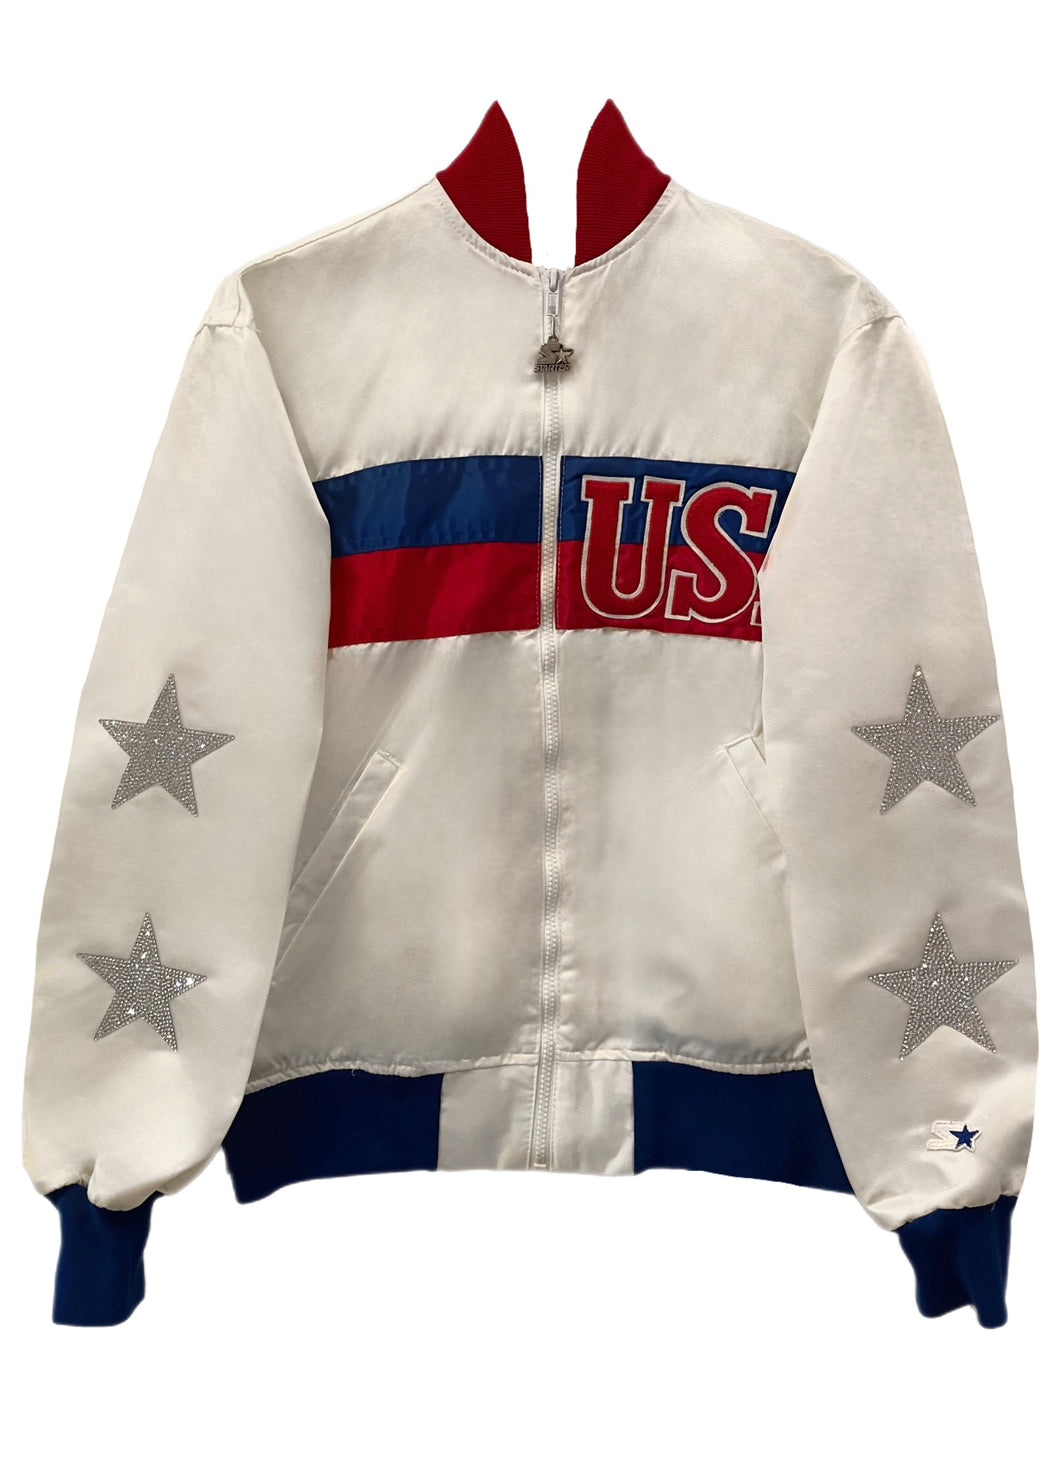 USA Olympics, One of a KIND Vintage Starter Jacket with Crystal Star Design